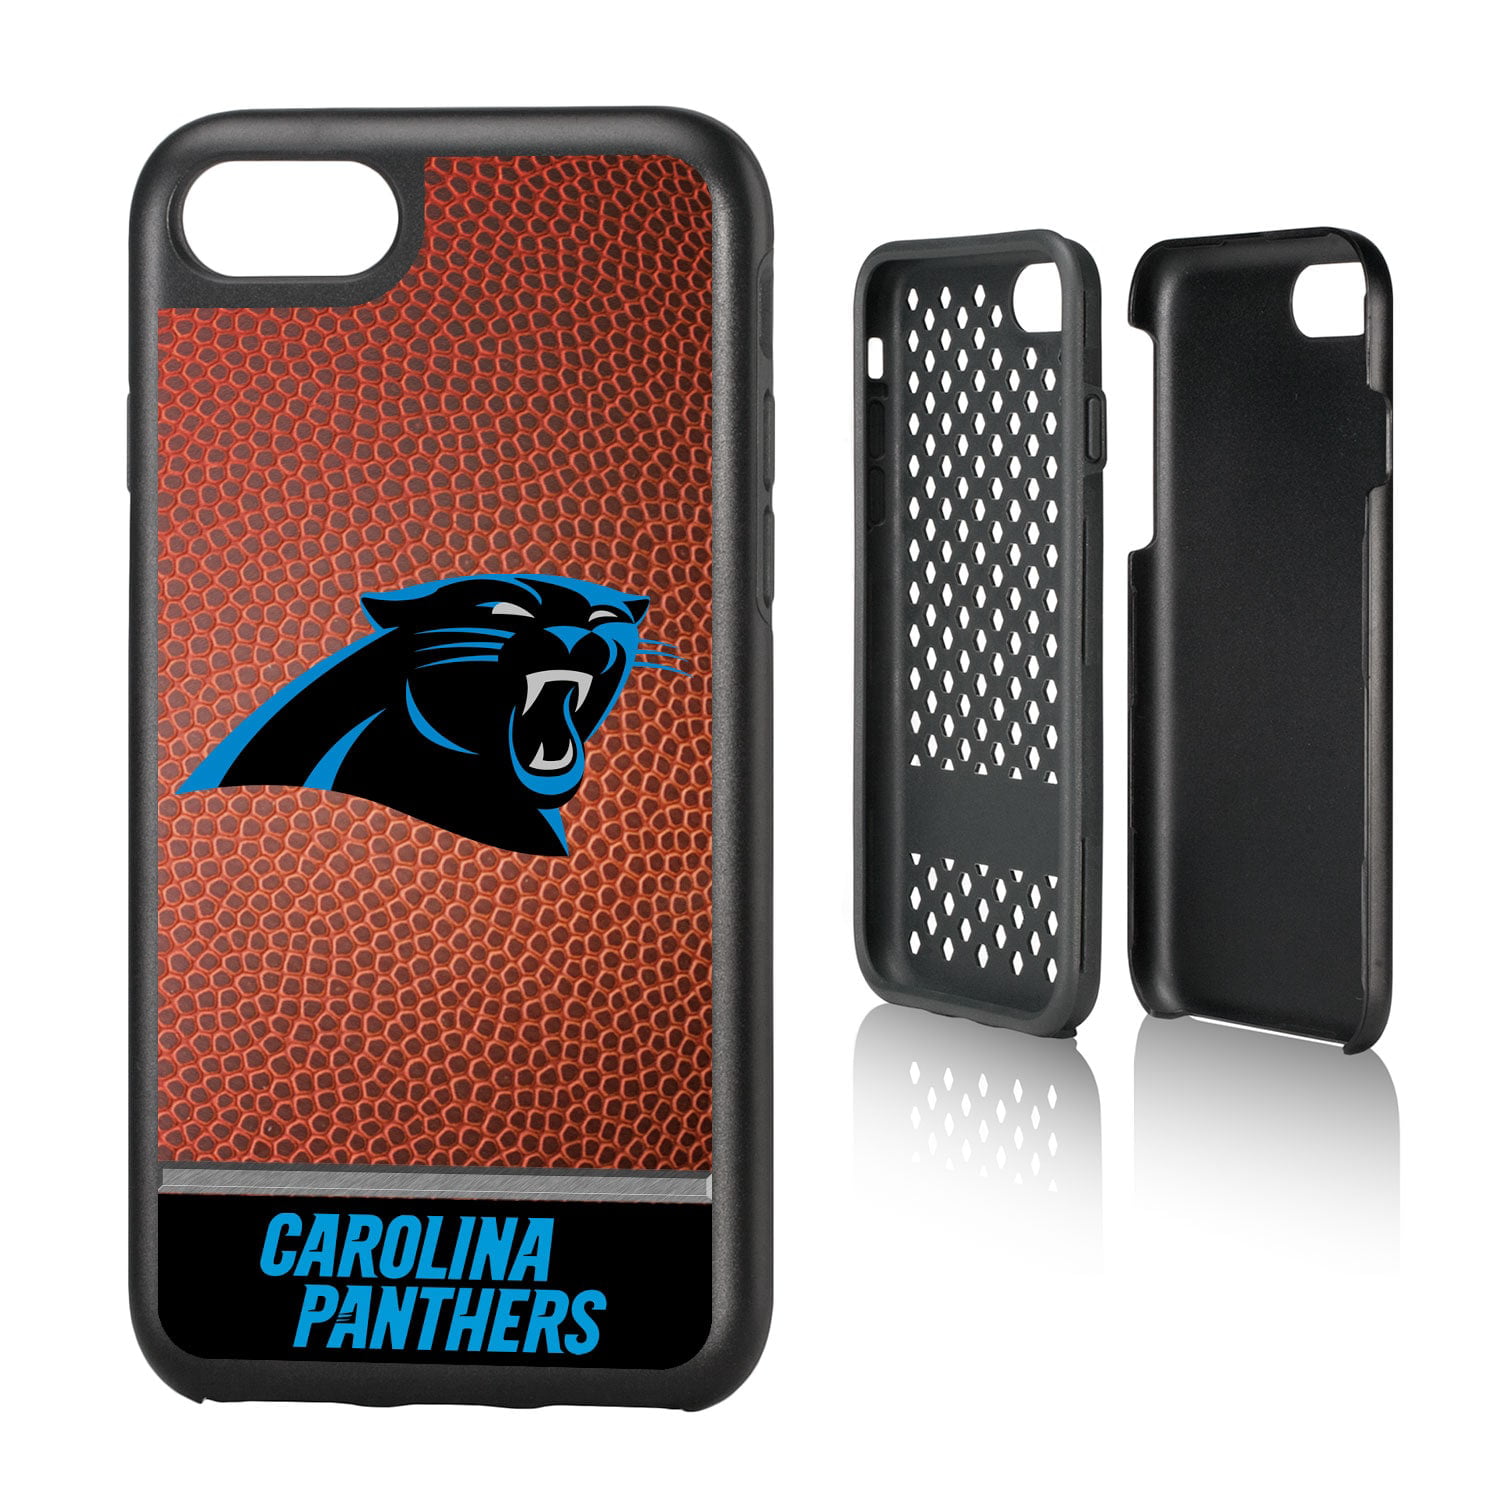 Decorative Decoupage Light Switch Covers Made To Order Carolina Panthers 